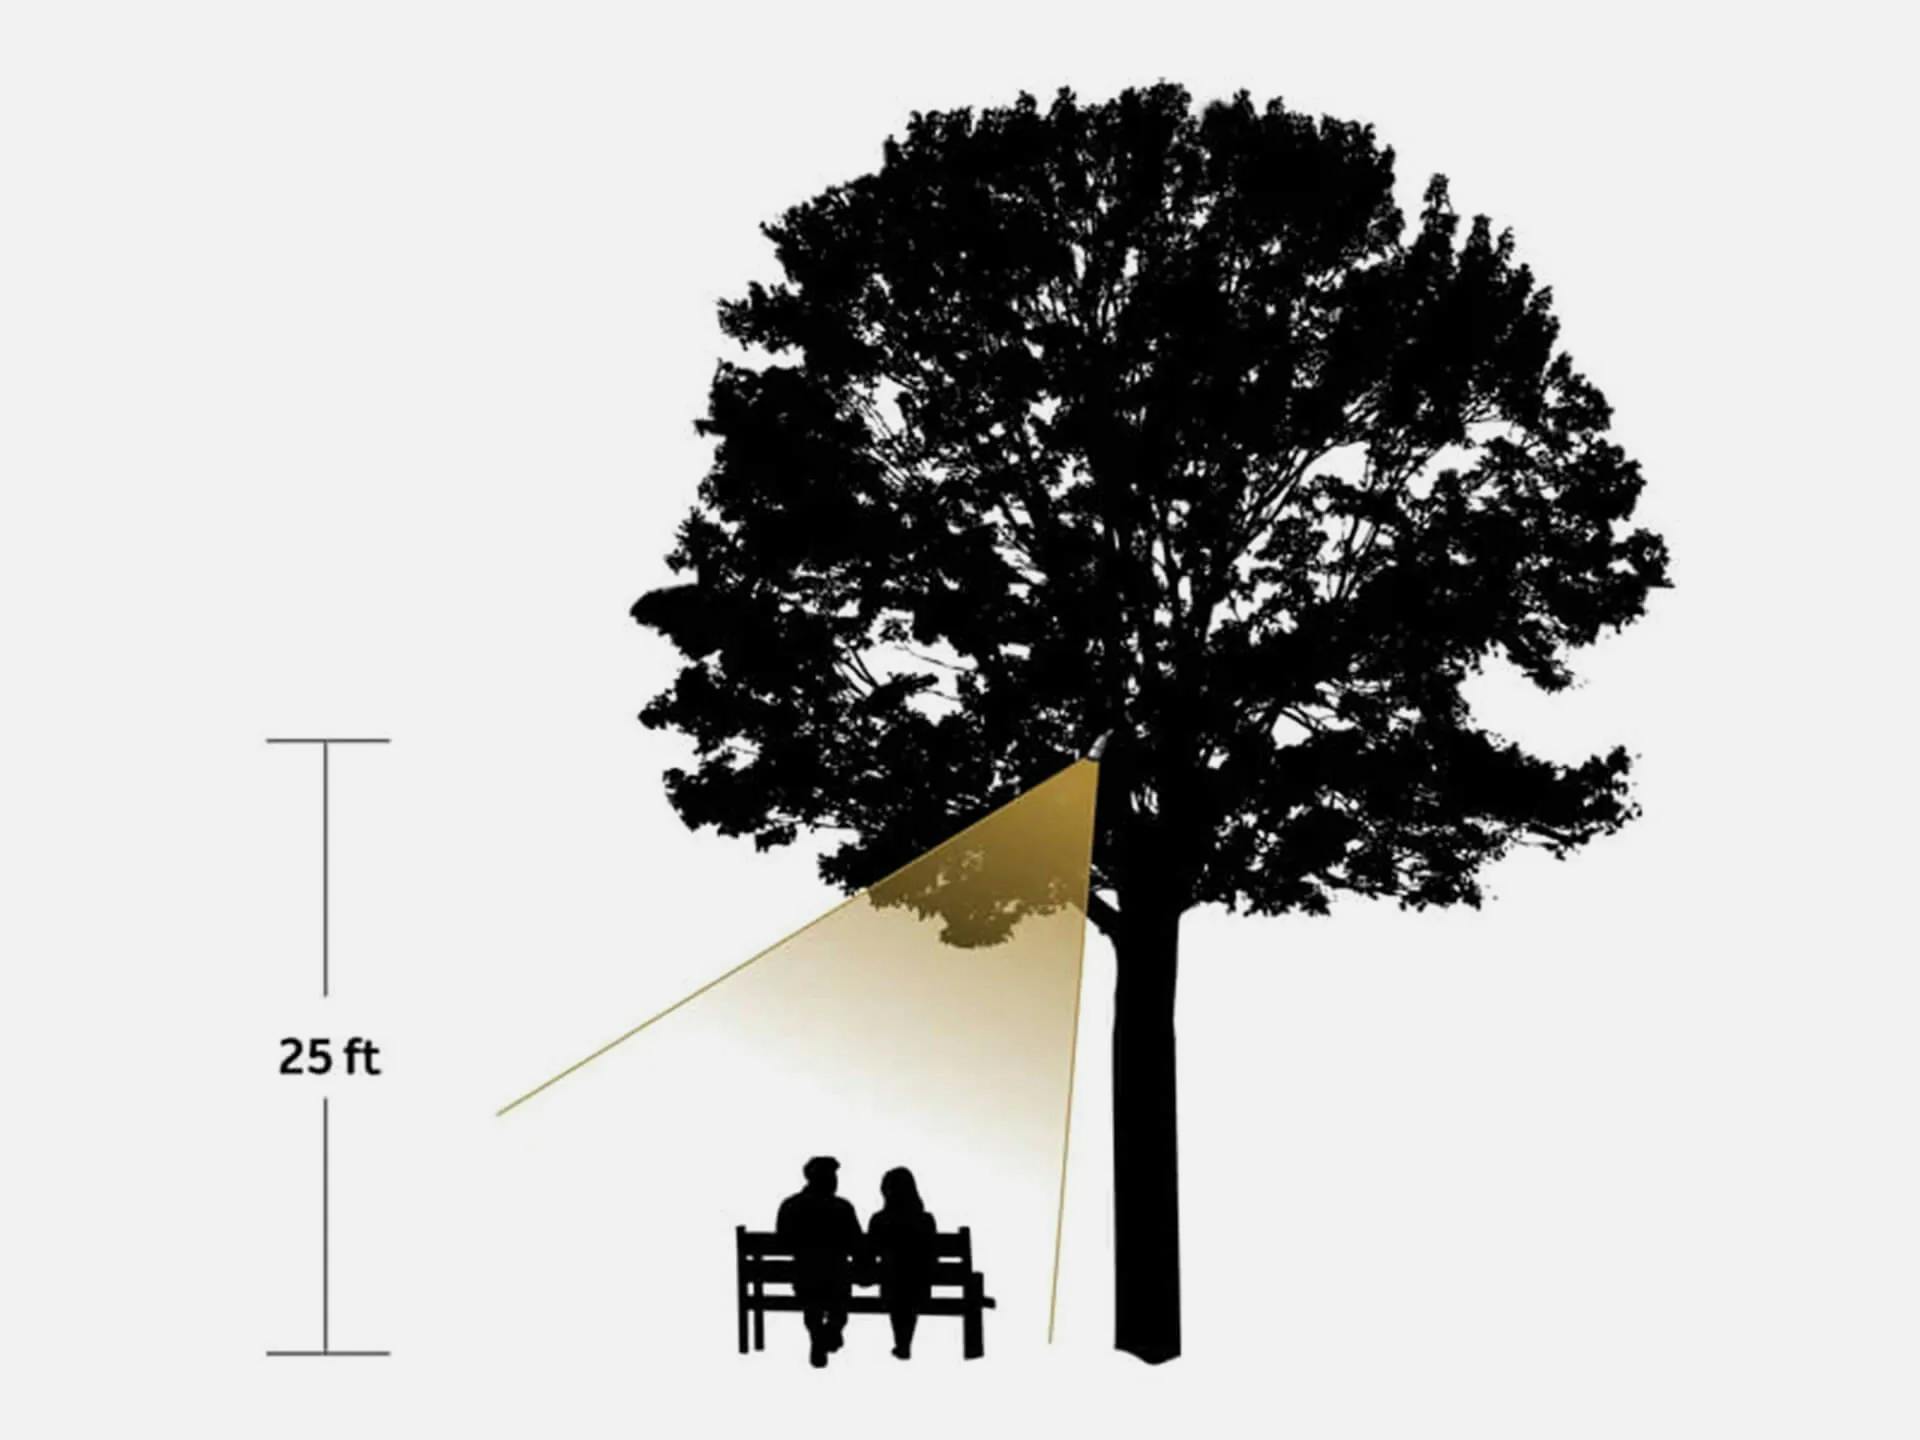 Illustration of a tall tree shining a light on a bench 25 feet up